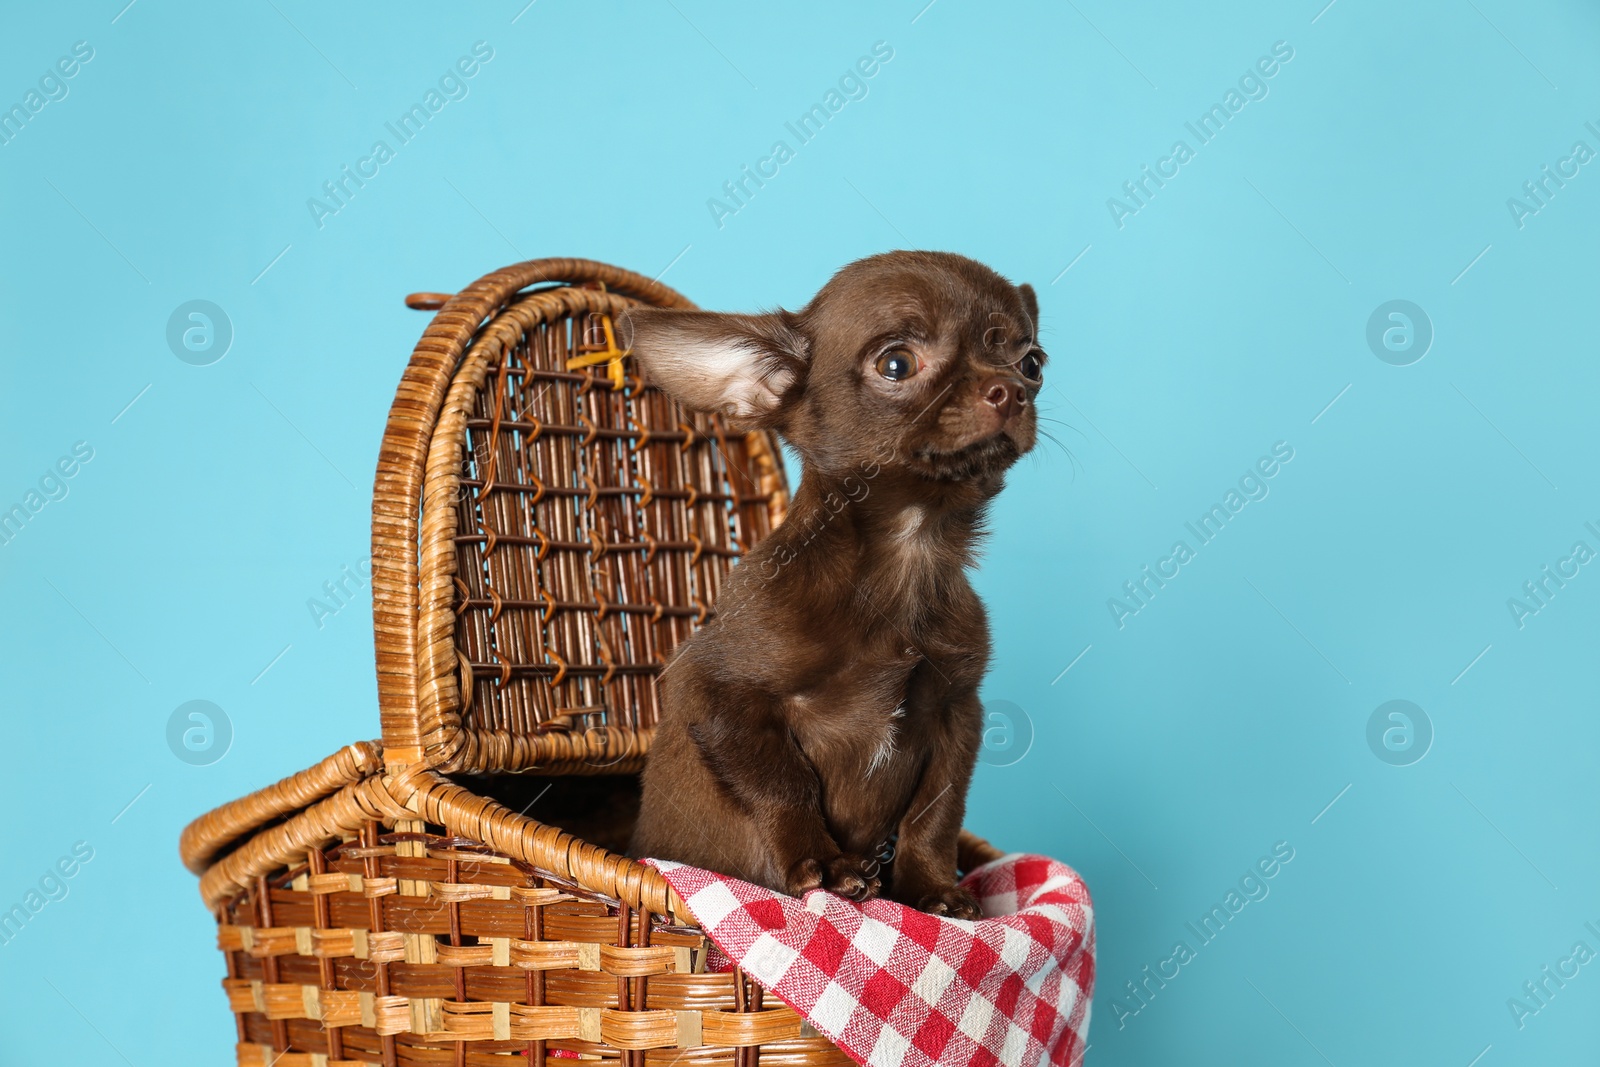 Photo of Cute small Chihuahua dog in picnic basket on light blue background